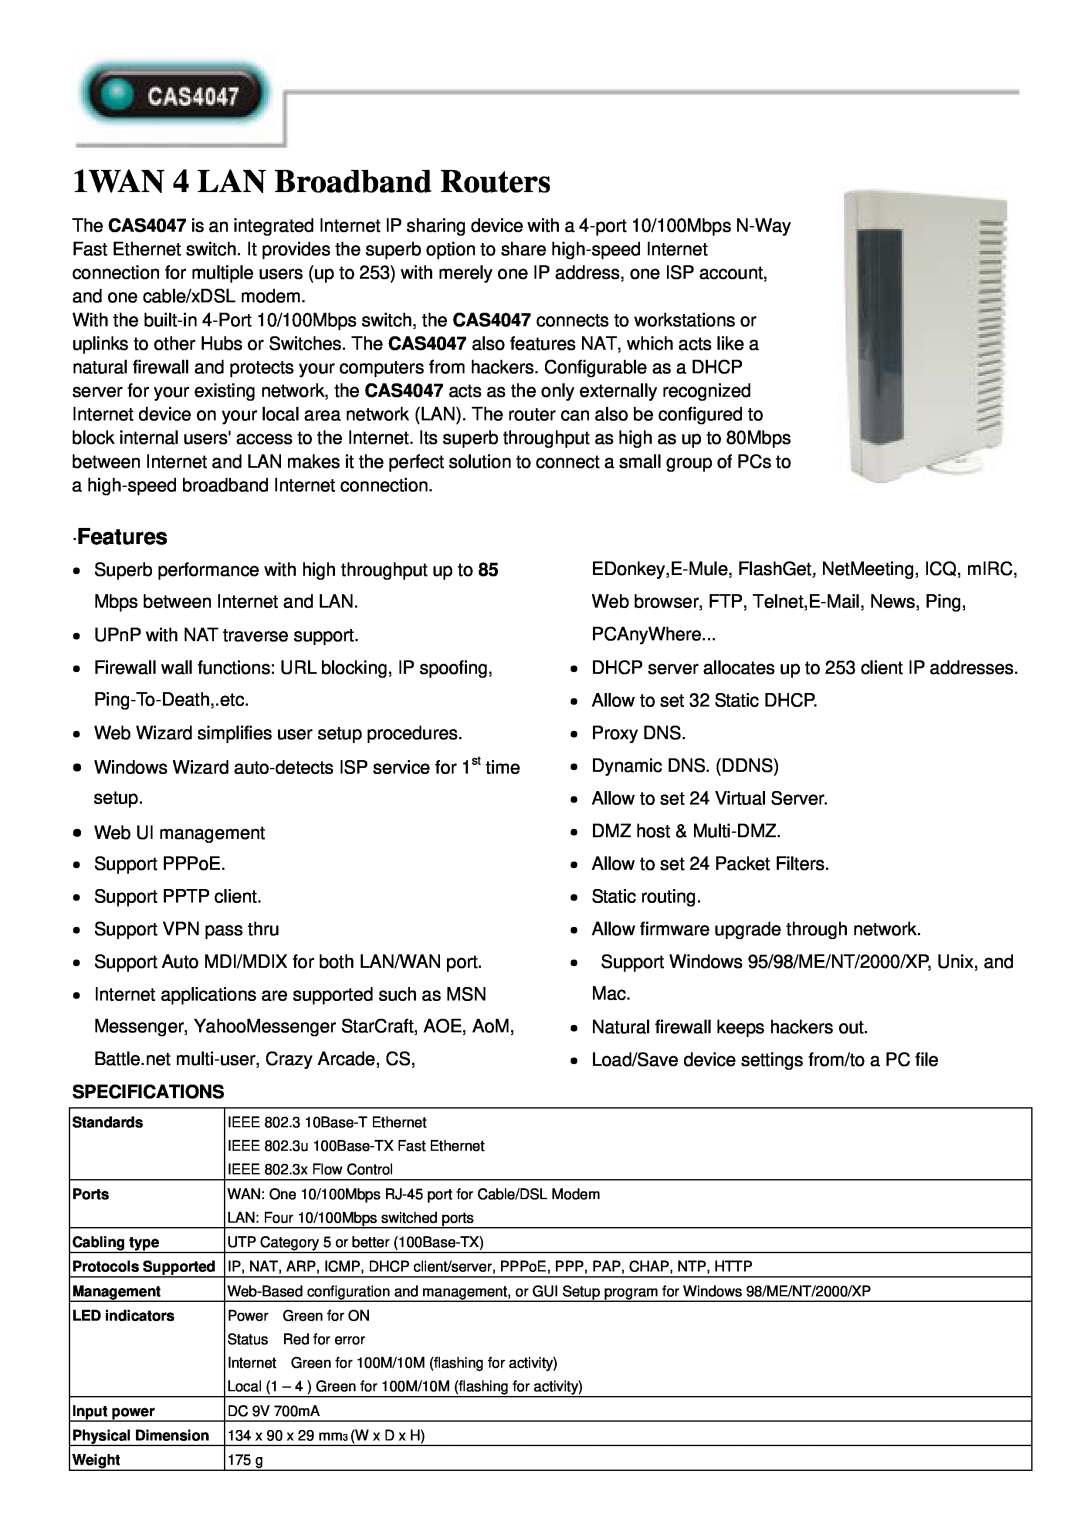 Abocom CAS4047 specifications 1WAN 4 LAN Broadband Routers, ·Features, Specifications 